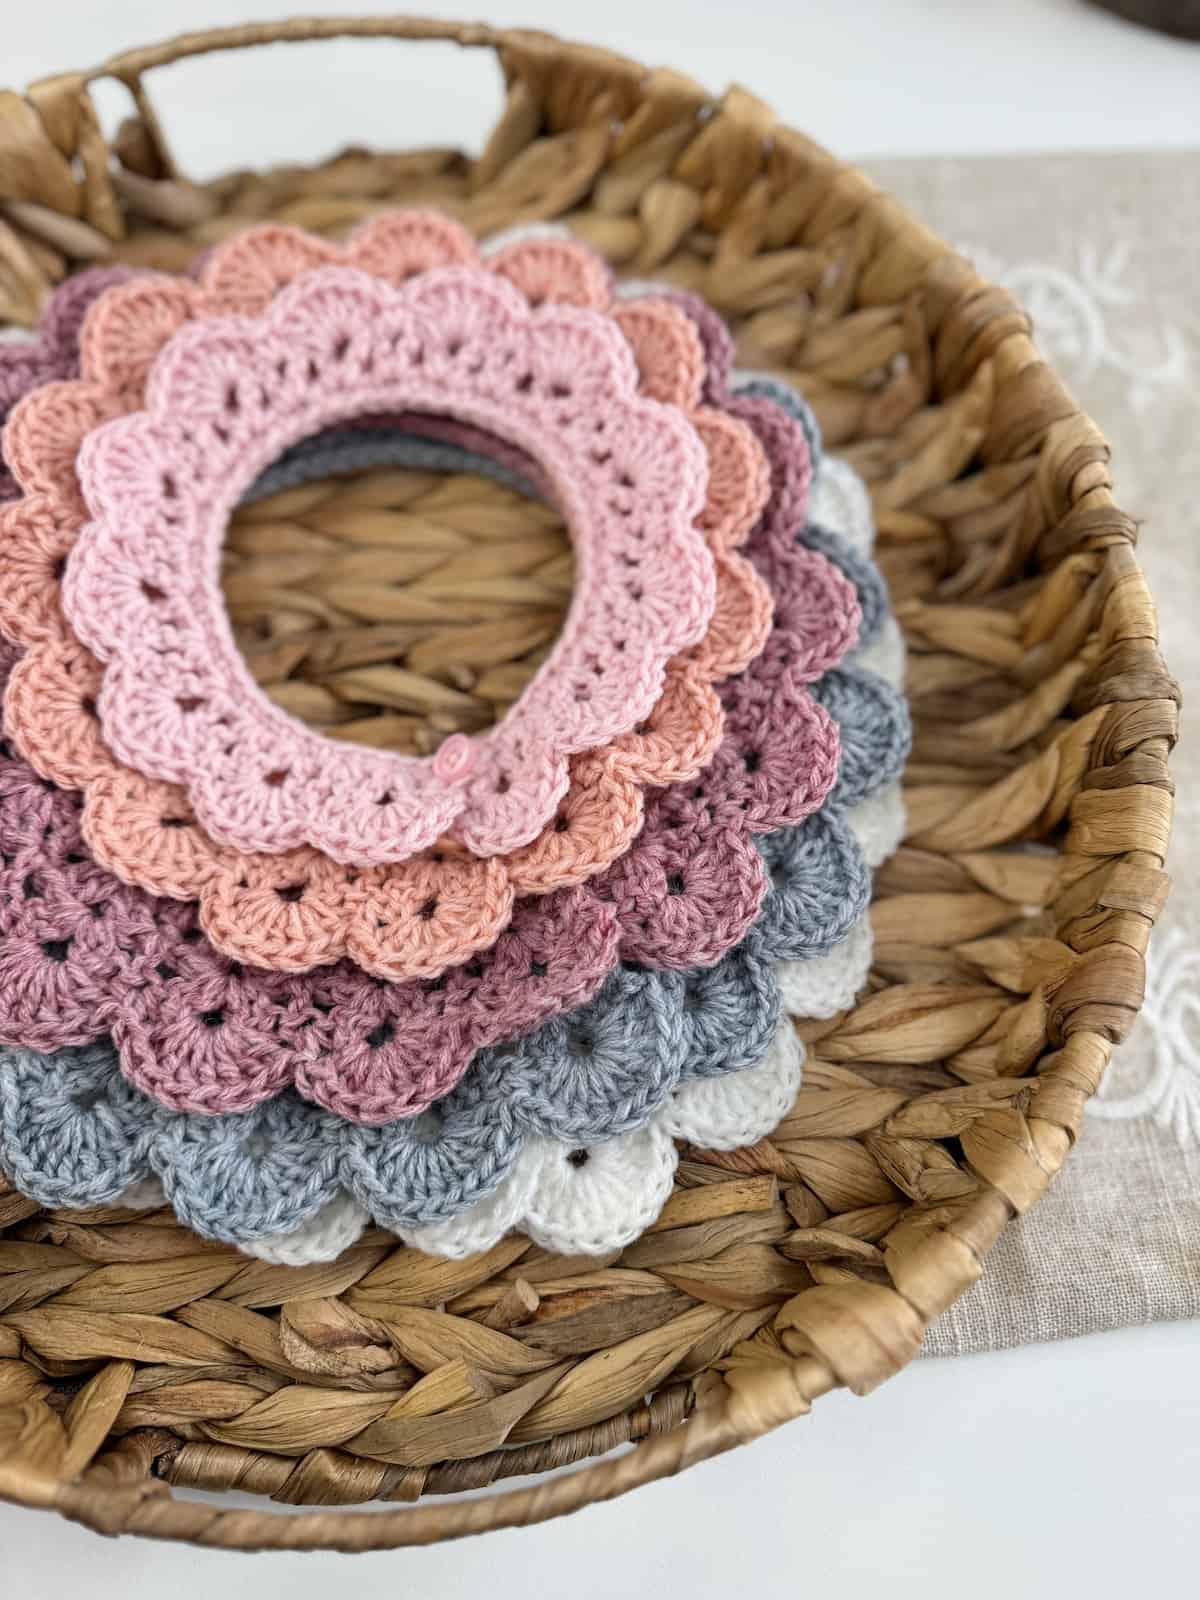 Pretty crocheted lace collars in a basket on a table.